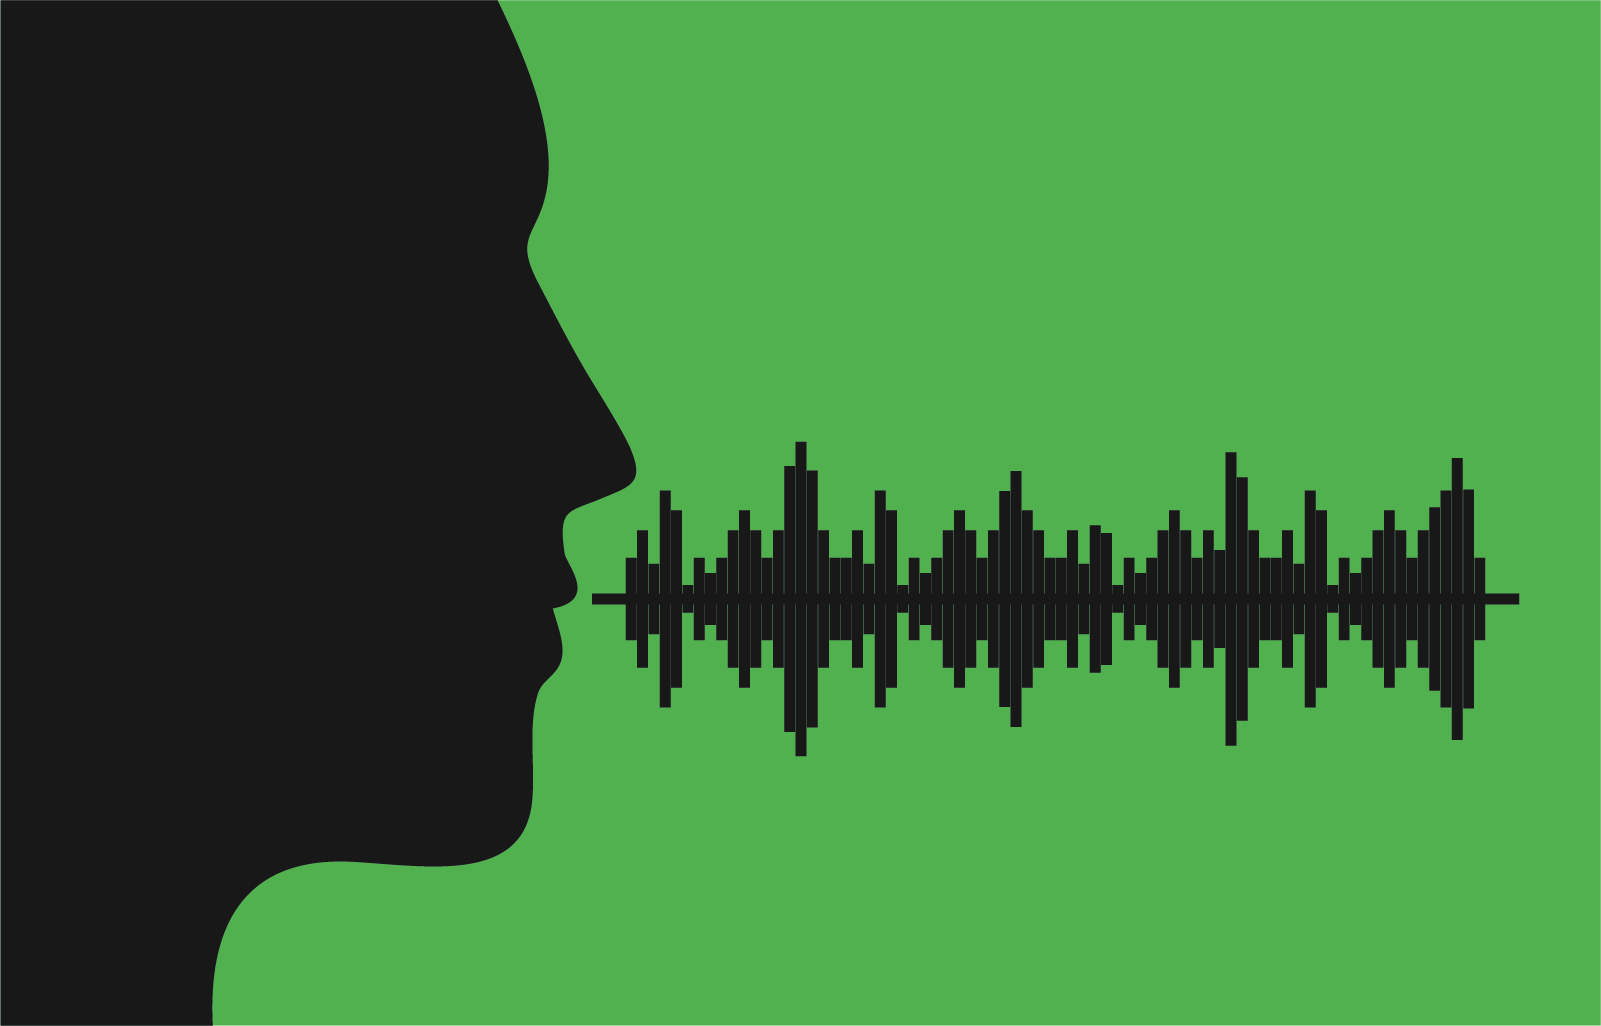 Will natural language processing change the way we consume and store data?